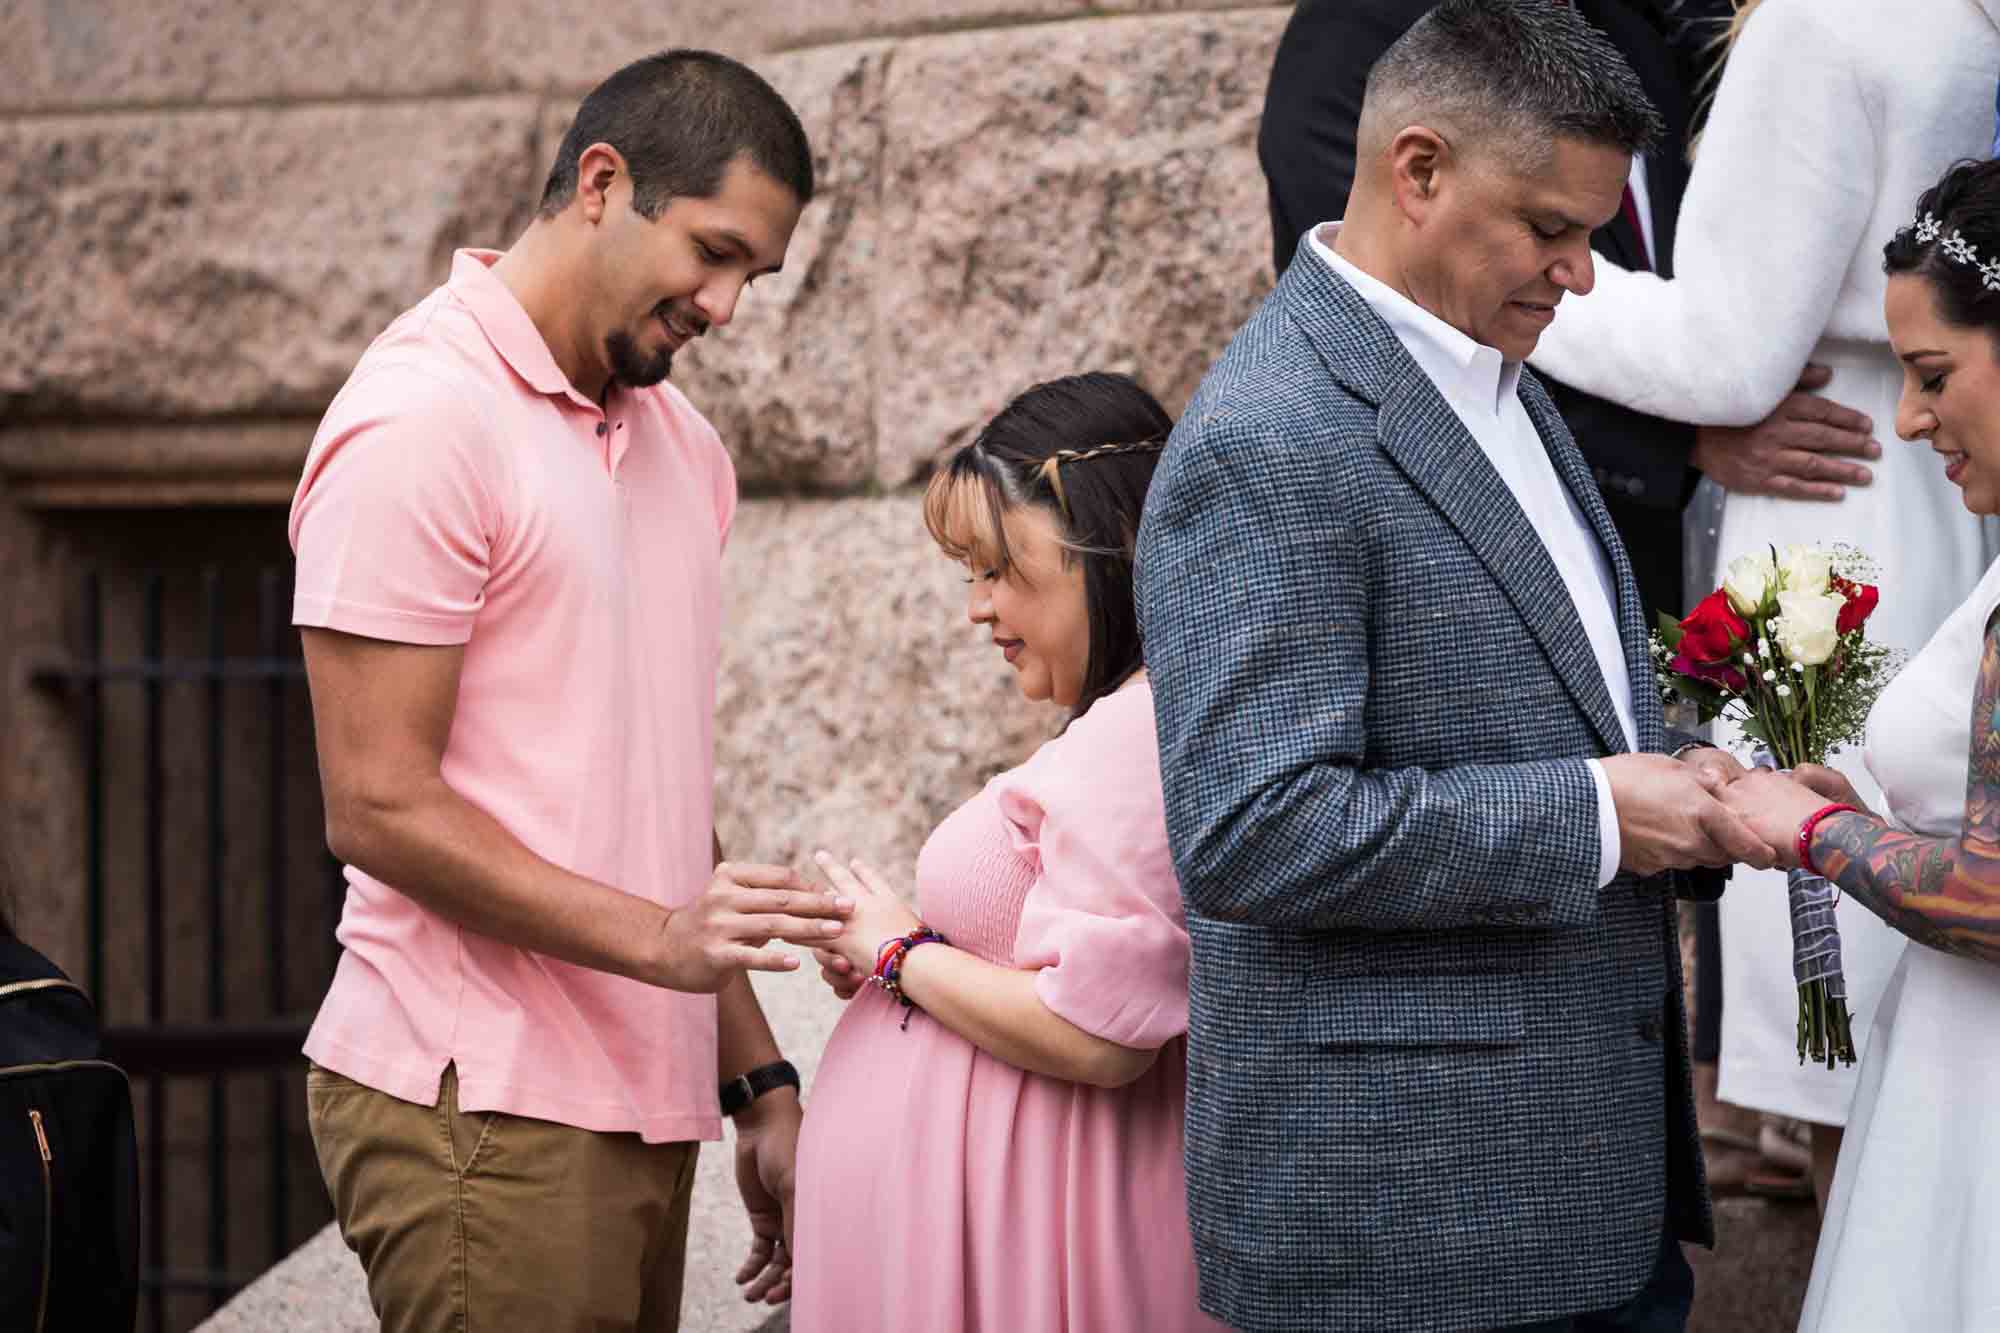 Bride in pink dress putting ring on hand of groom wearing pink shirt 